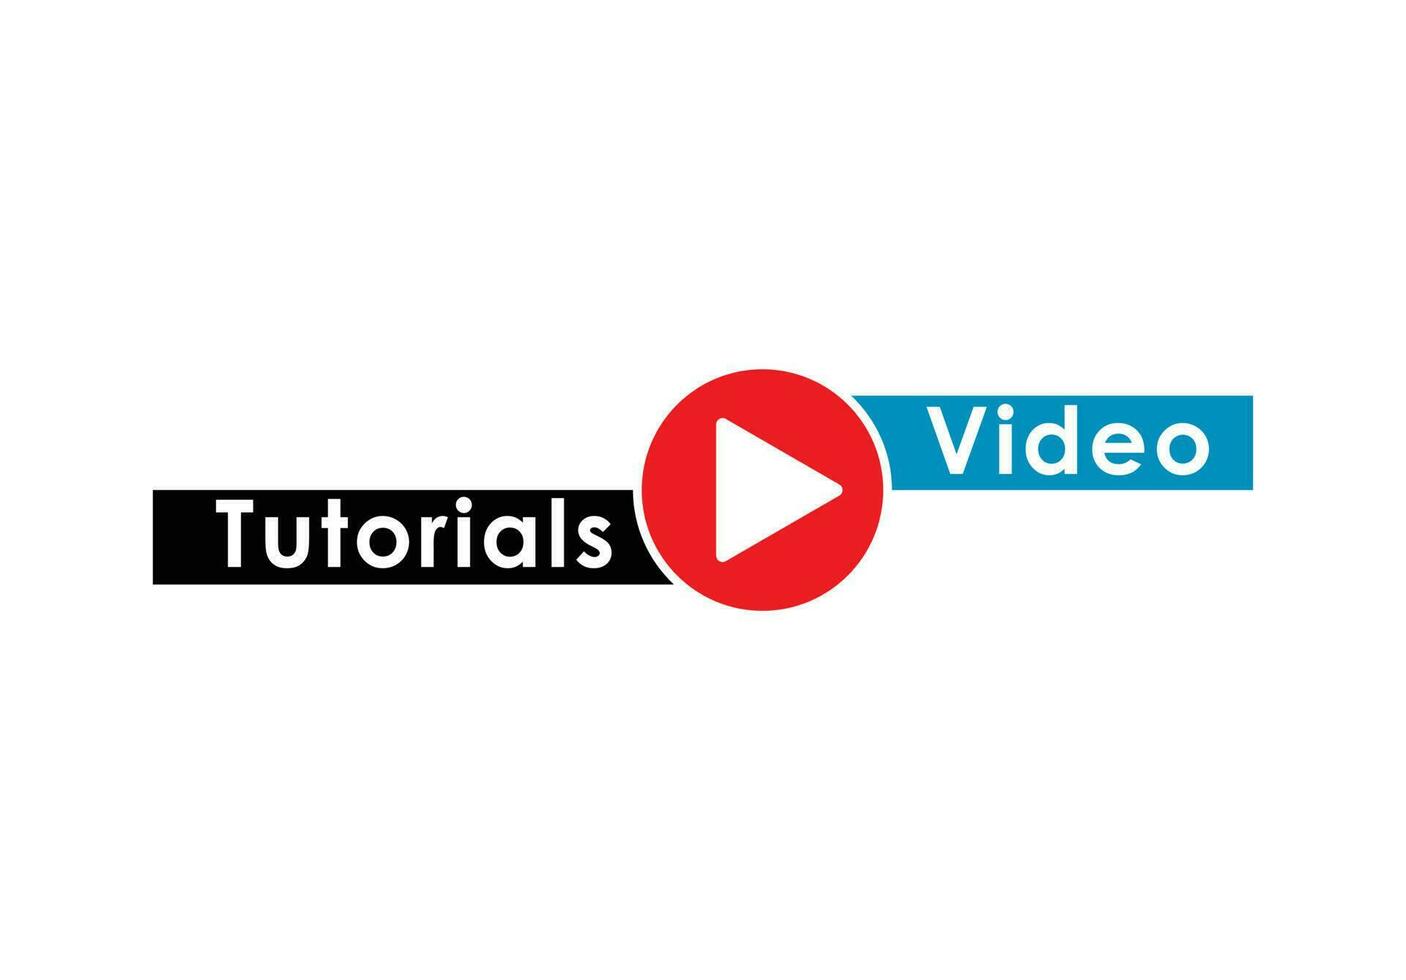 Play video tutorials education button concept vector illustration on background